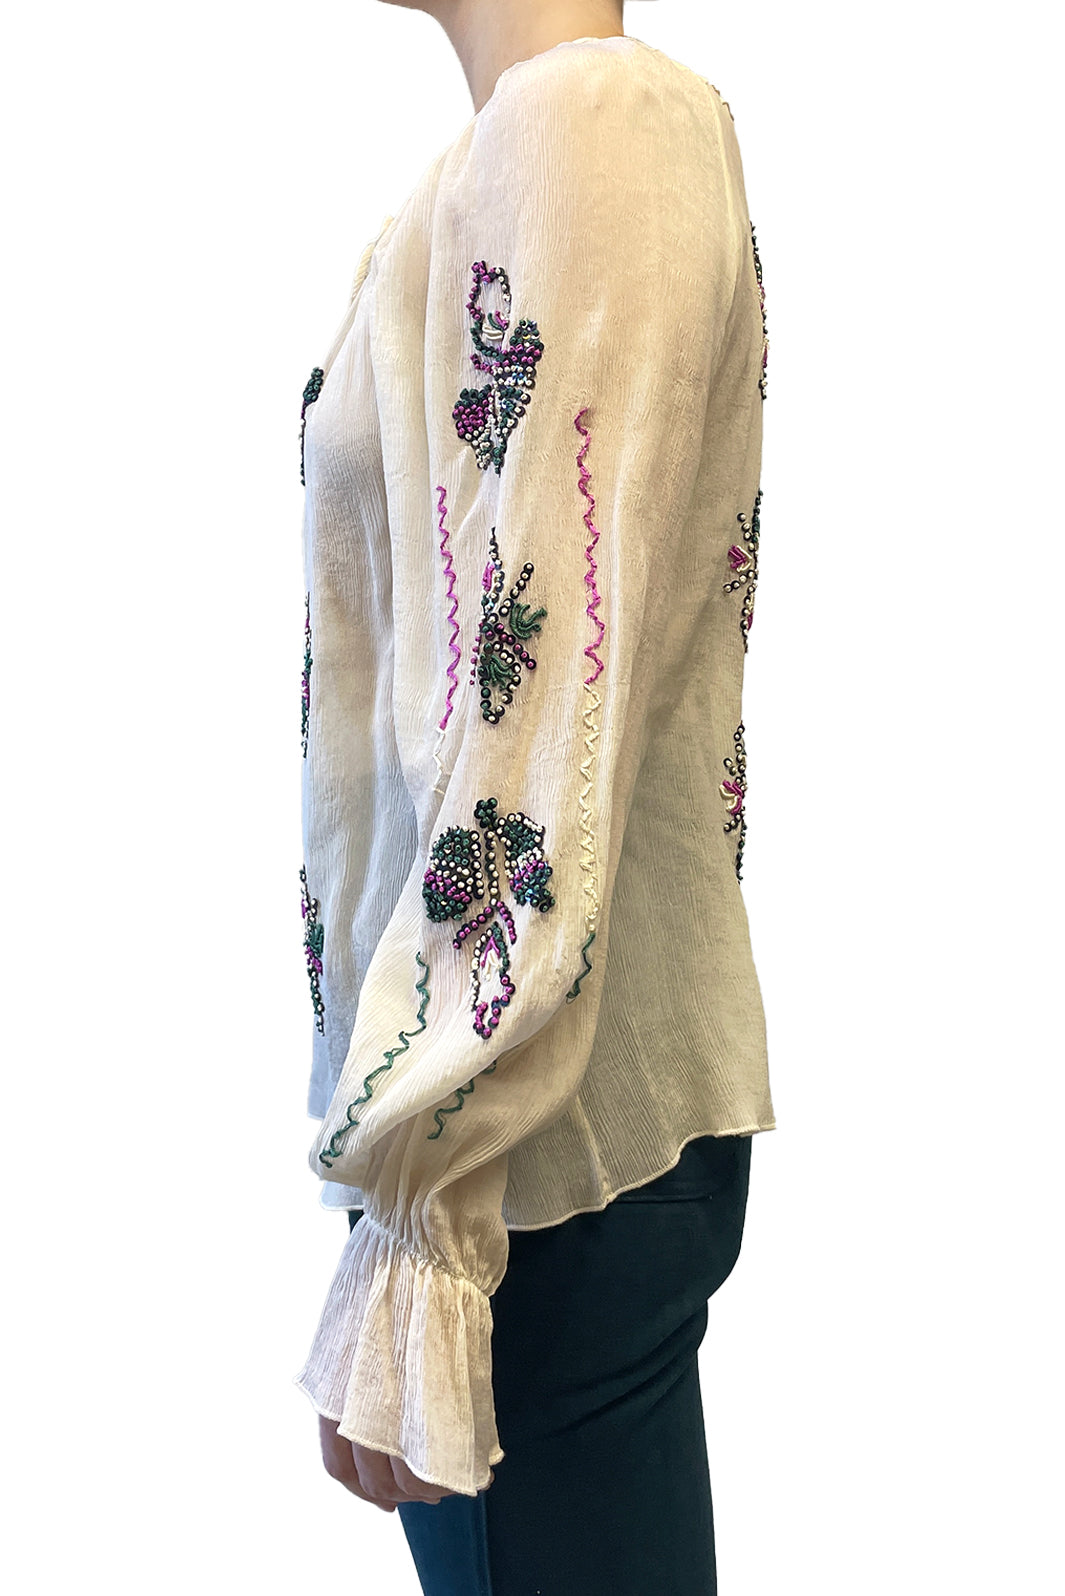 Vintage Anna Sui Hand Embroidered Long Sleeve Top